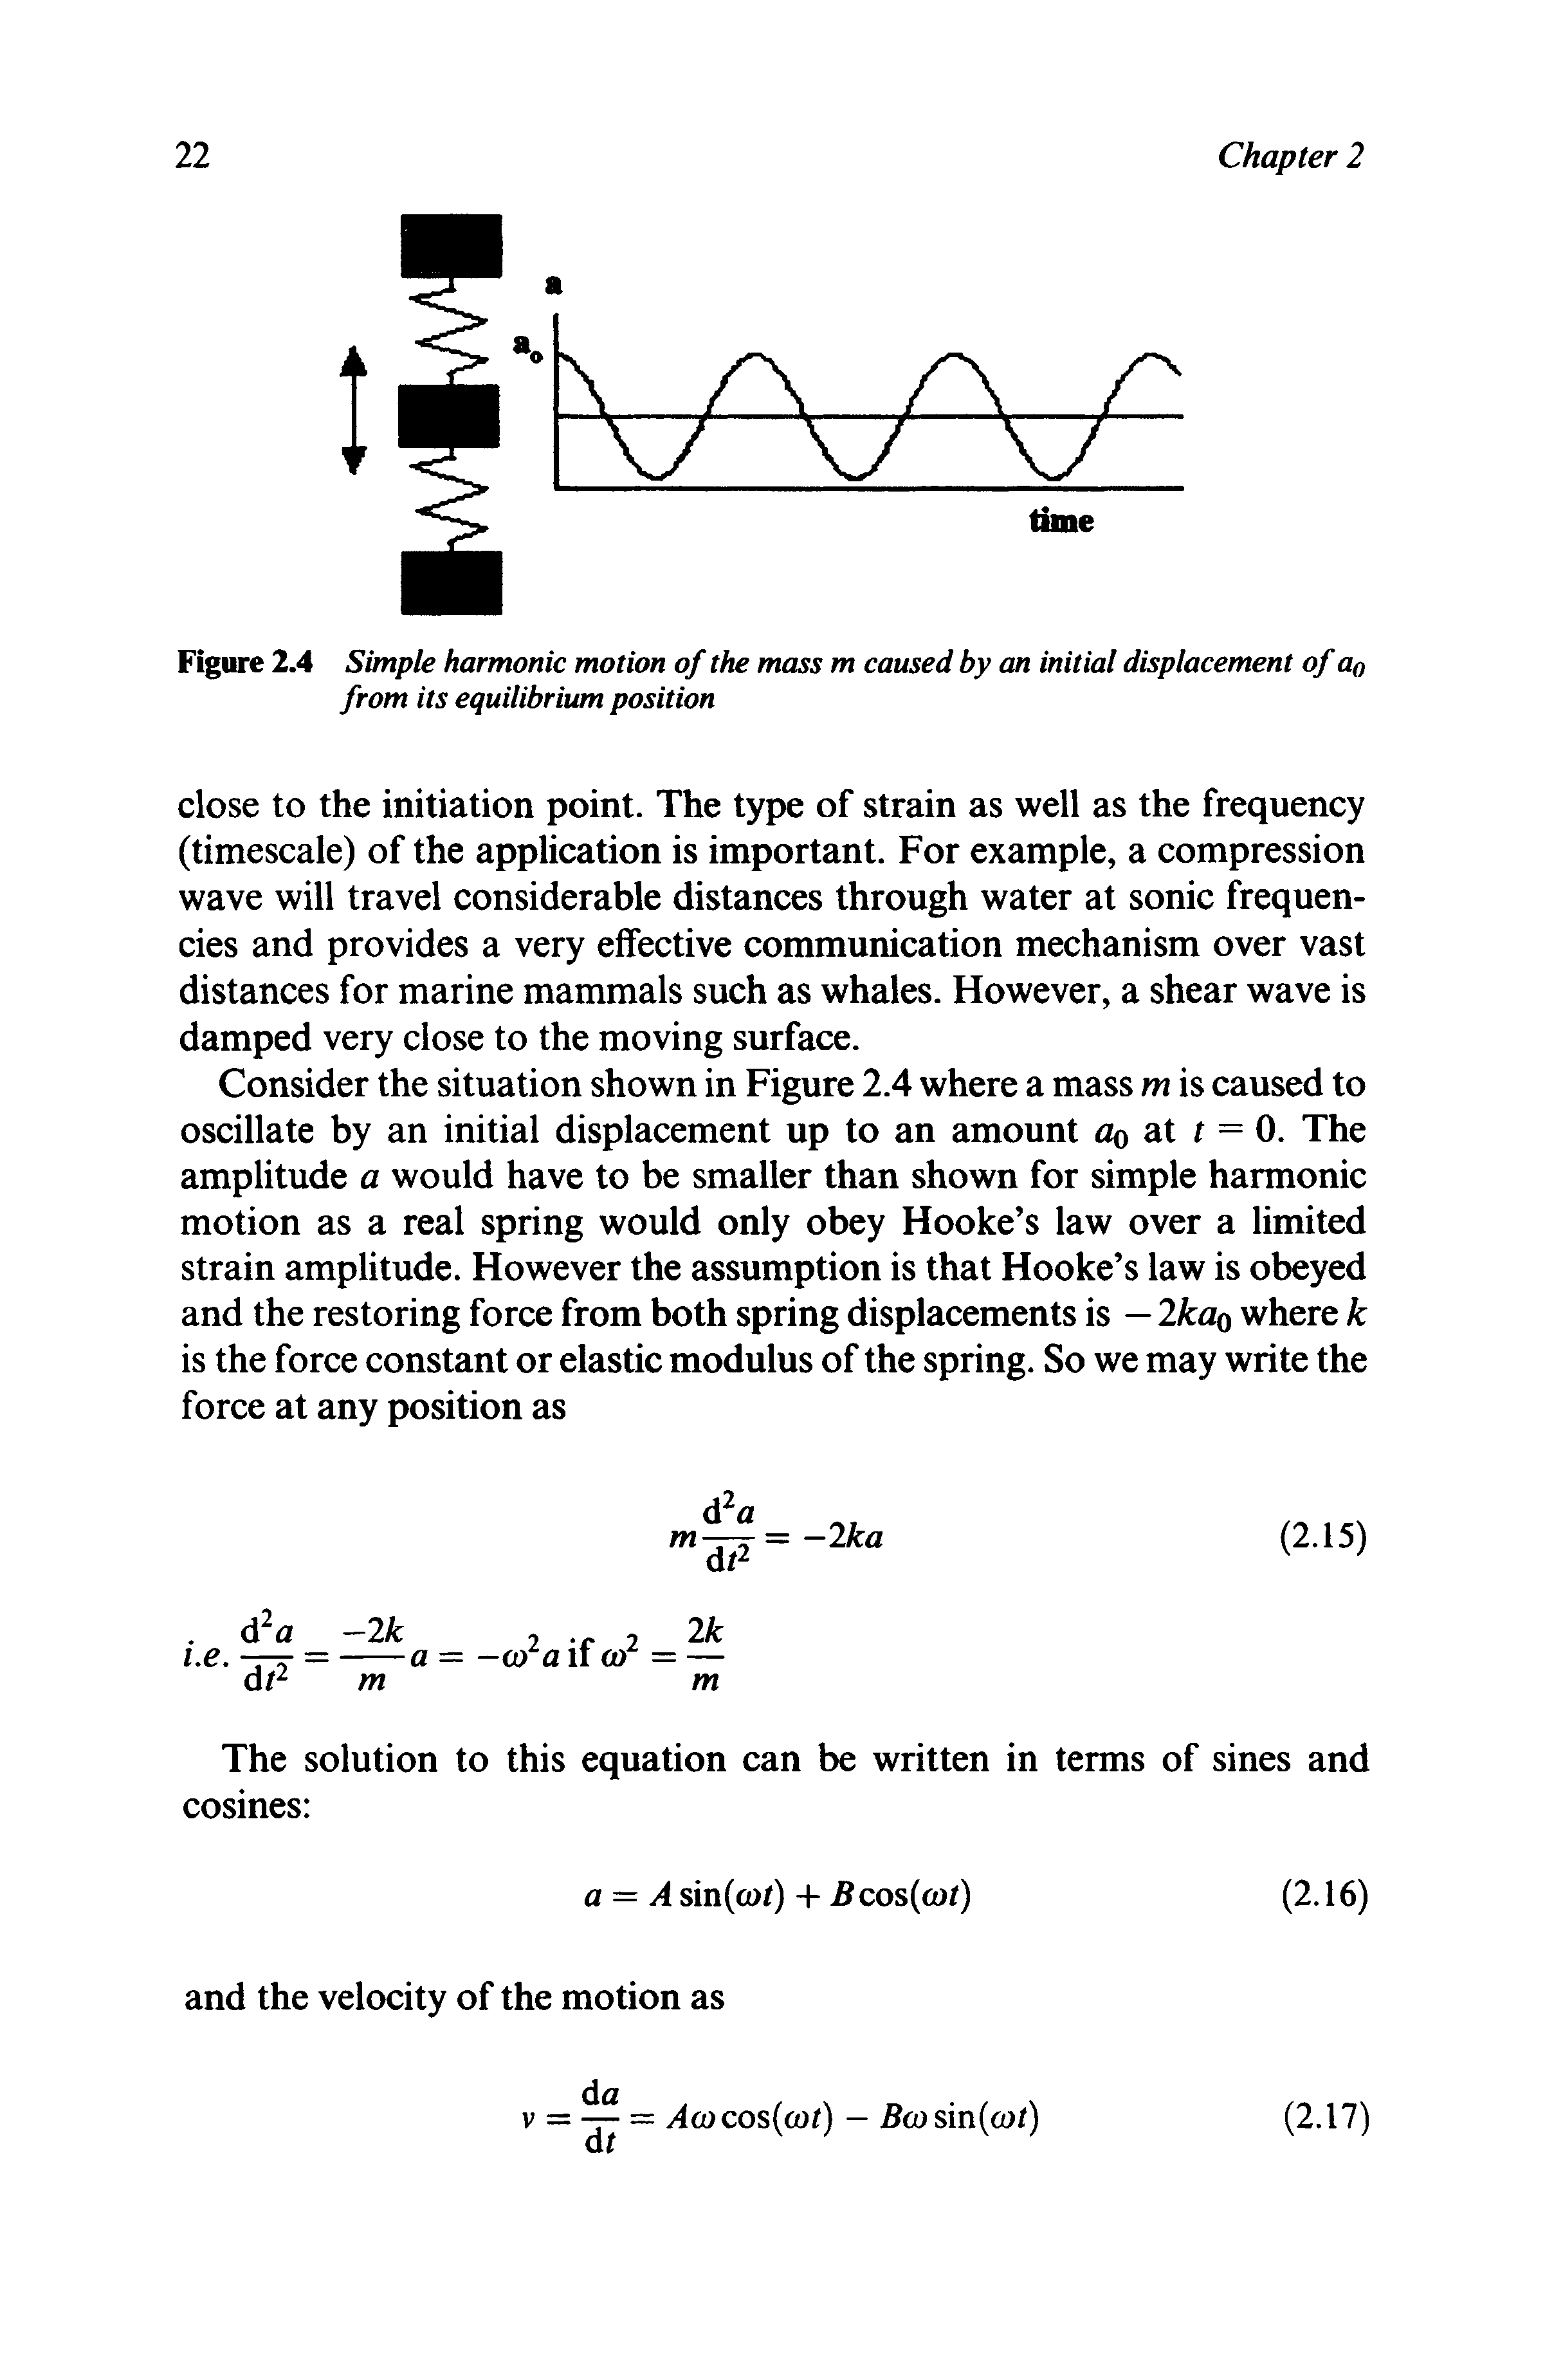 Figure 2.4 Simple harmonic motion of the mass m caused by an initial displacement of a0 from its equilibrium position...